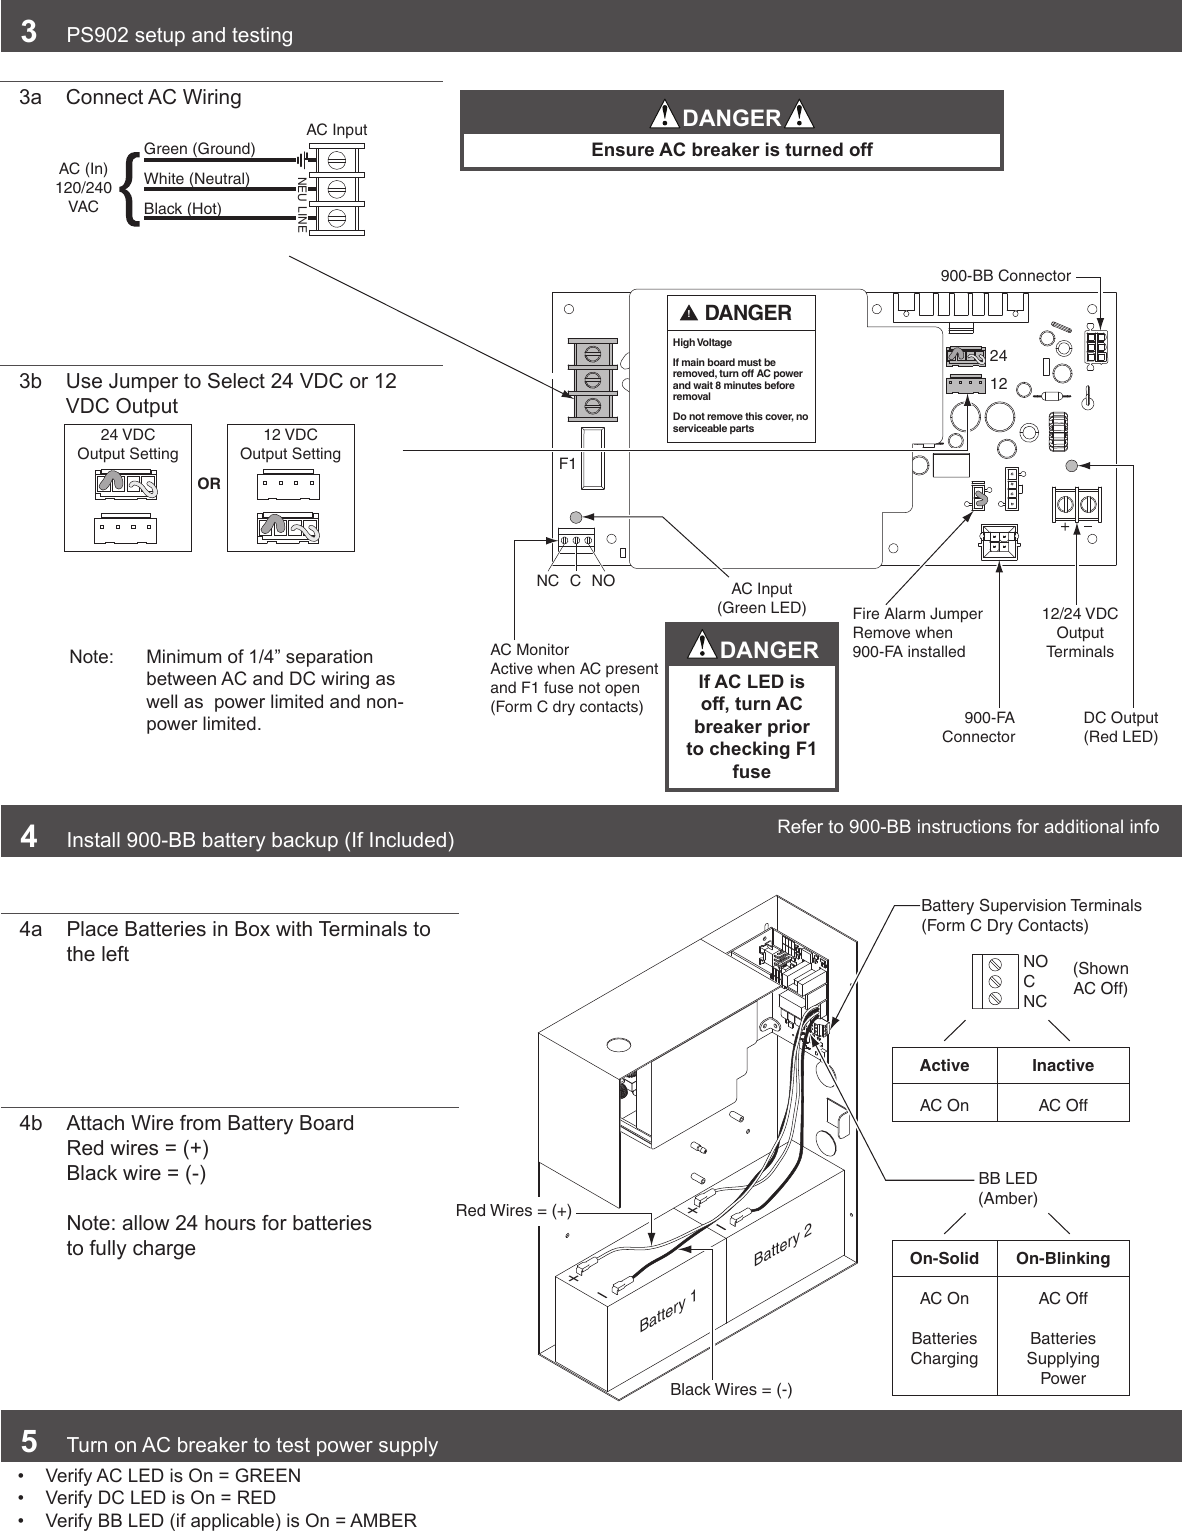 Page 3 of 4 - Locks  PS902 Instructions 106440